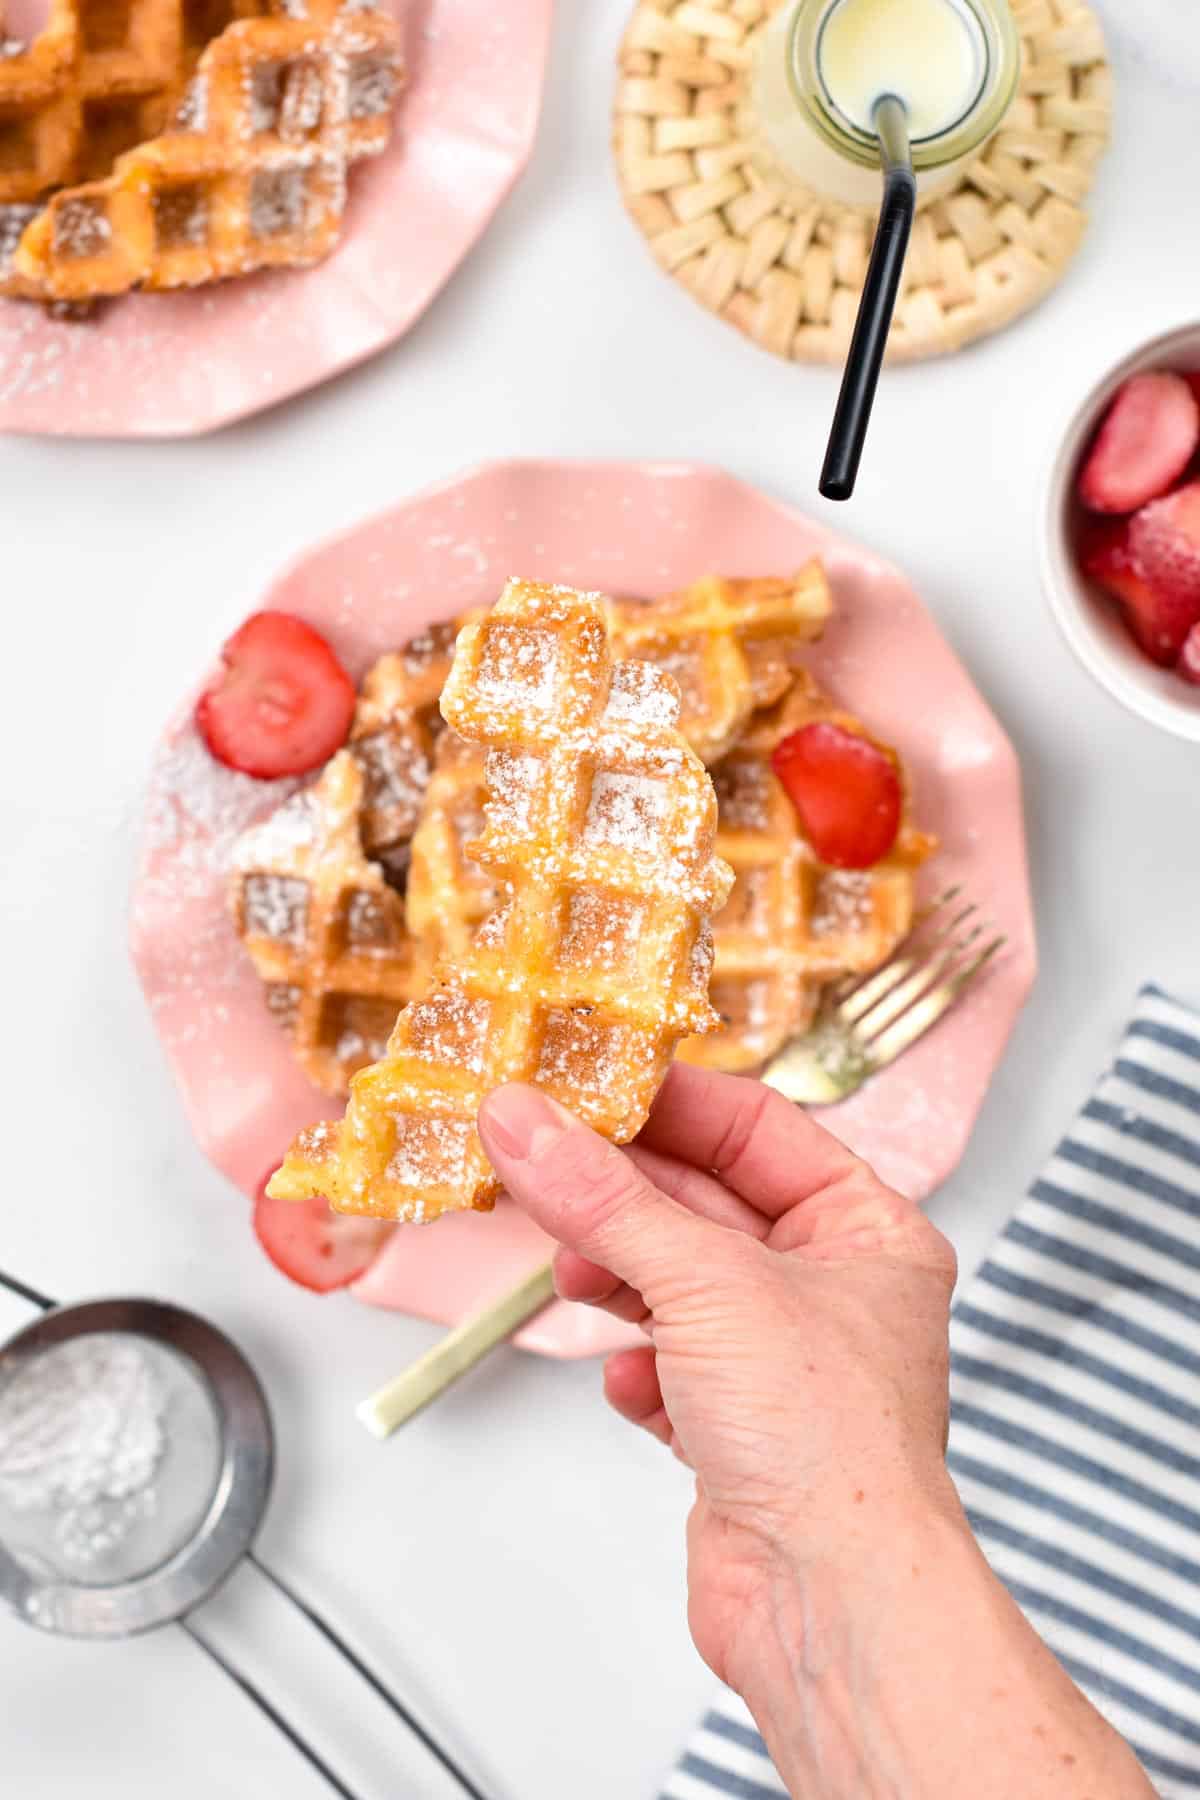 These Croffles also called croissant waffles are buttery sweet crispy waffles made with just two ingredients. If you are a waffle and a croissant lover for breakfast, this recipe is a must-try.